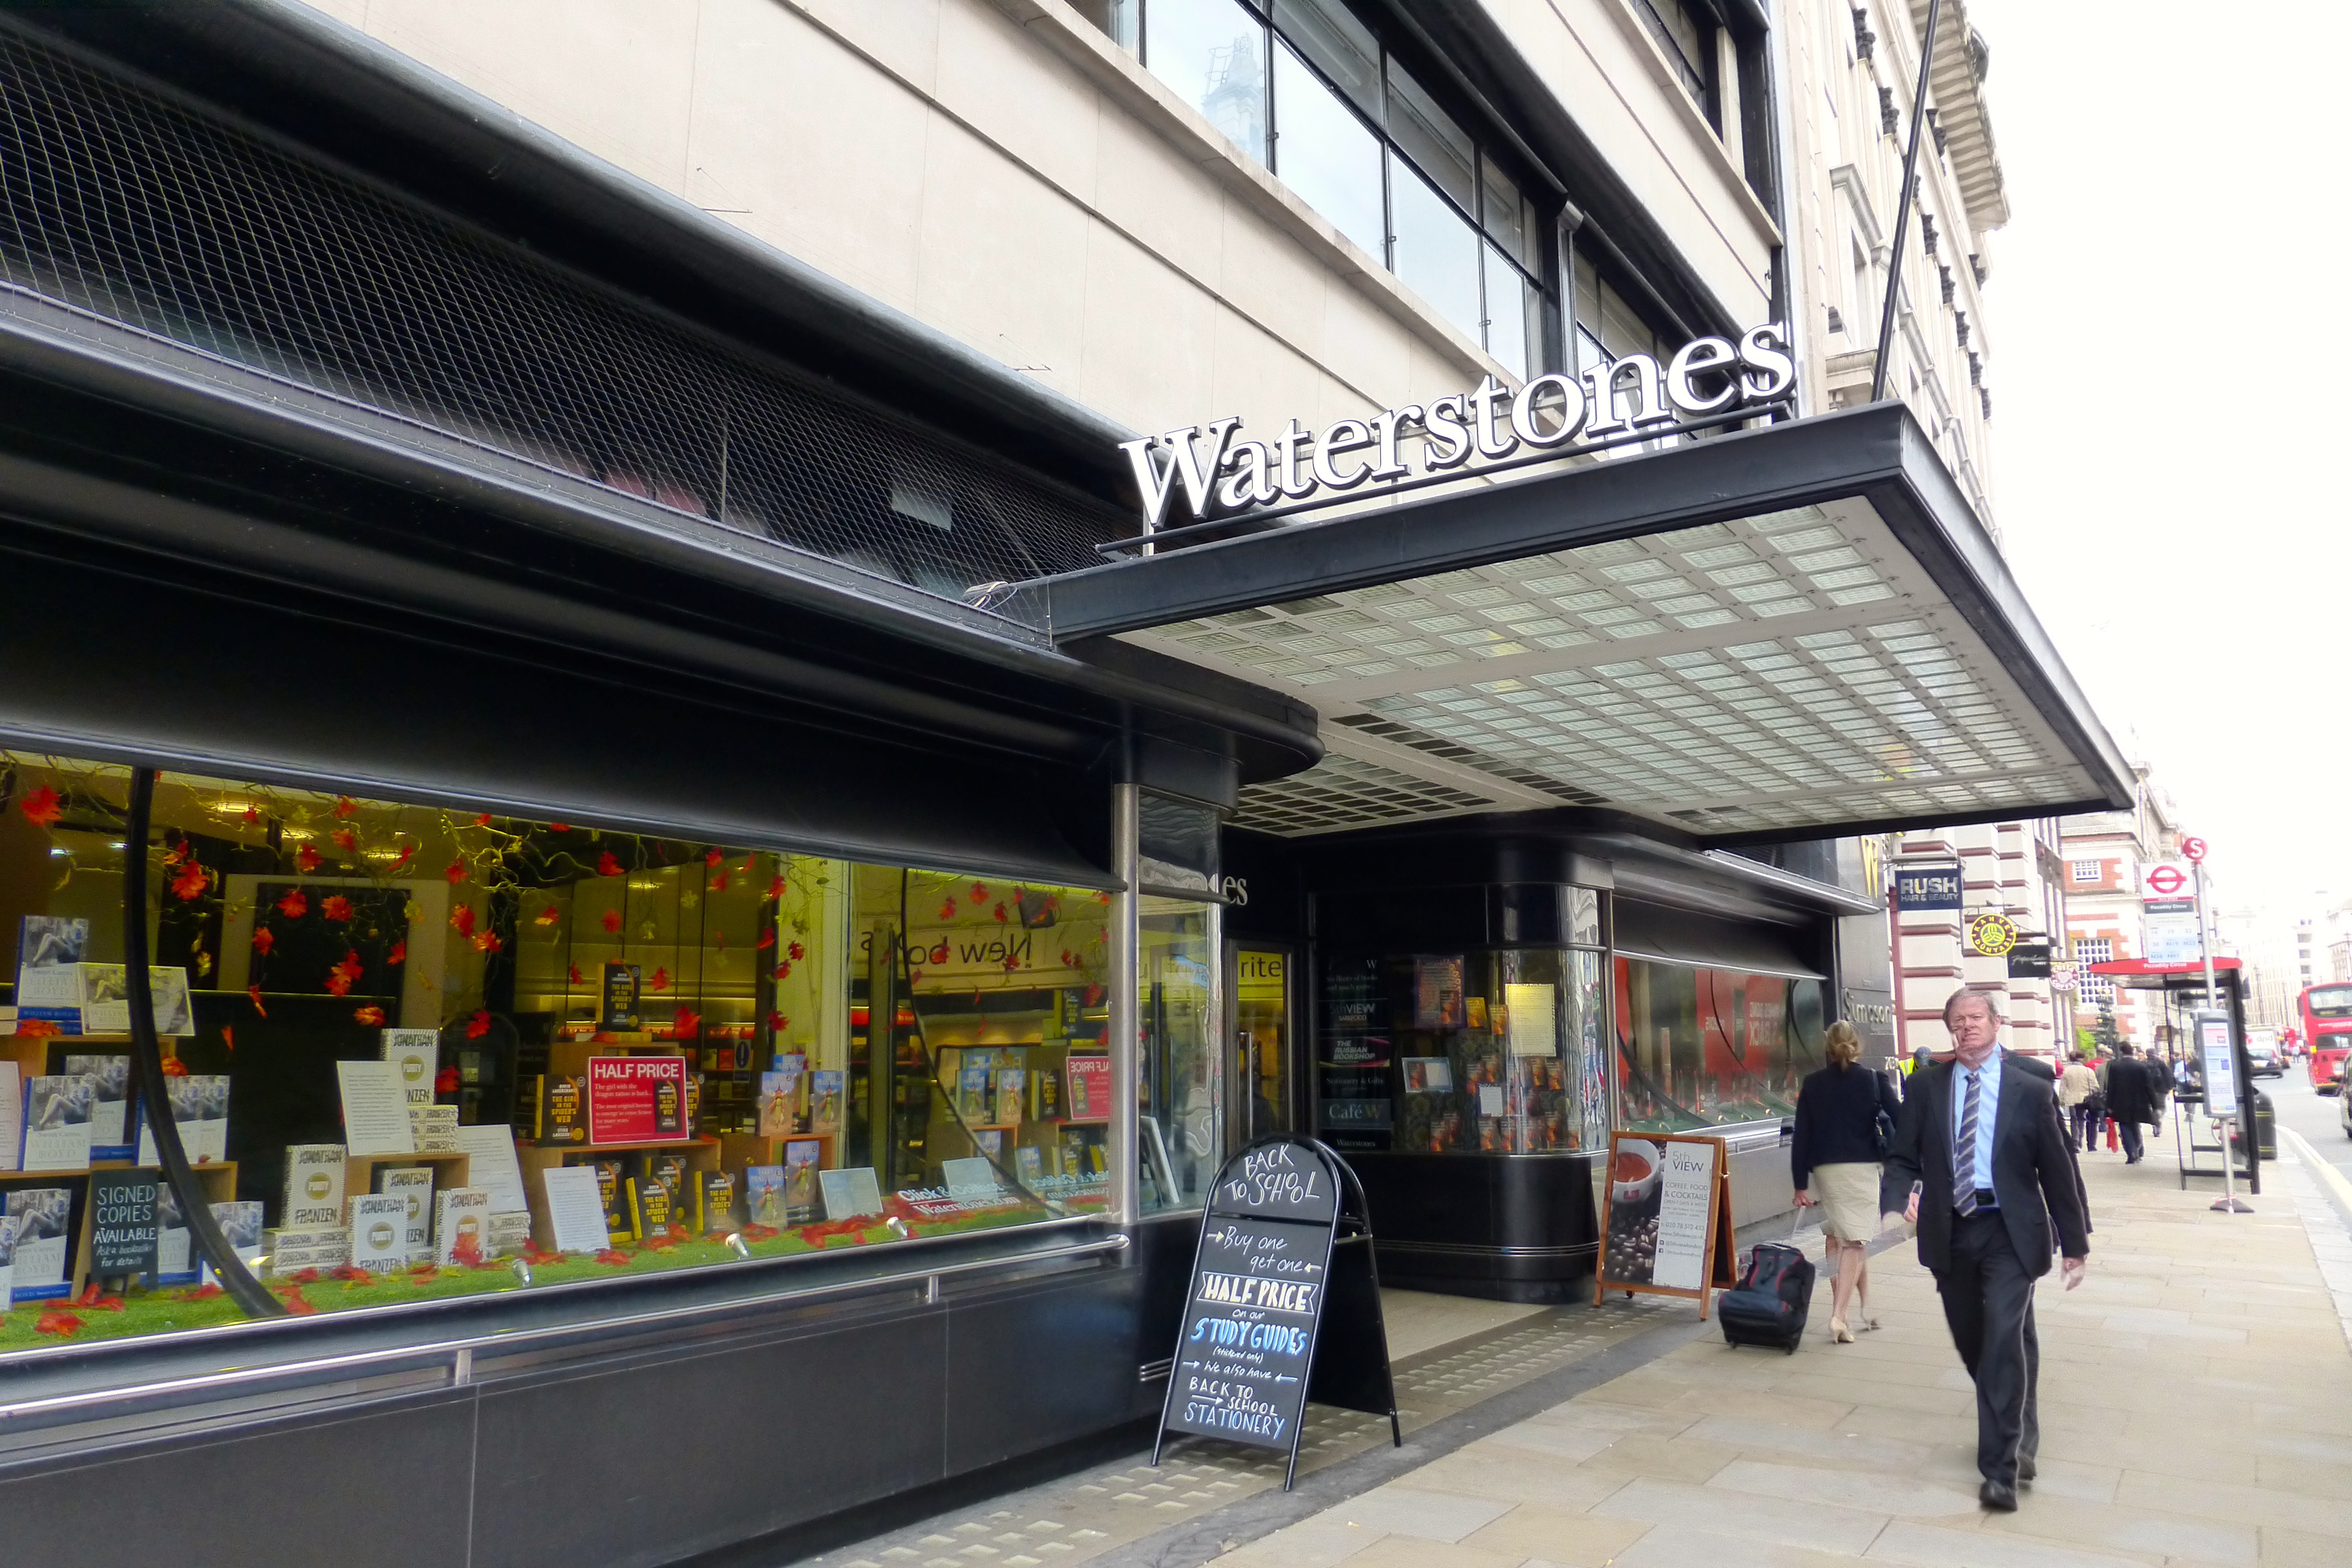 Above: More potential to be achieved at Waterstones on cards, believes Hazel. 